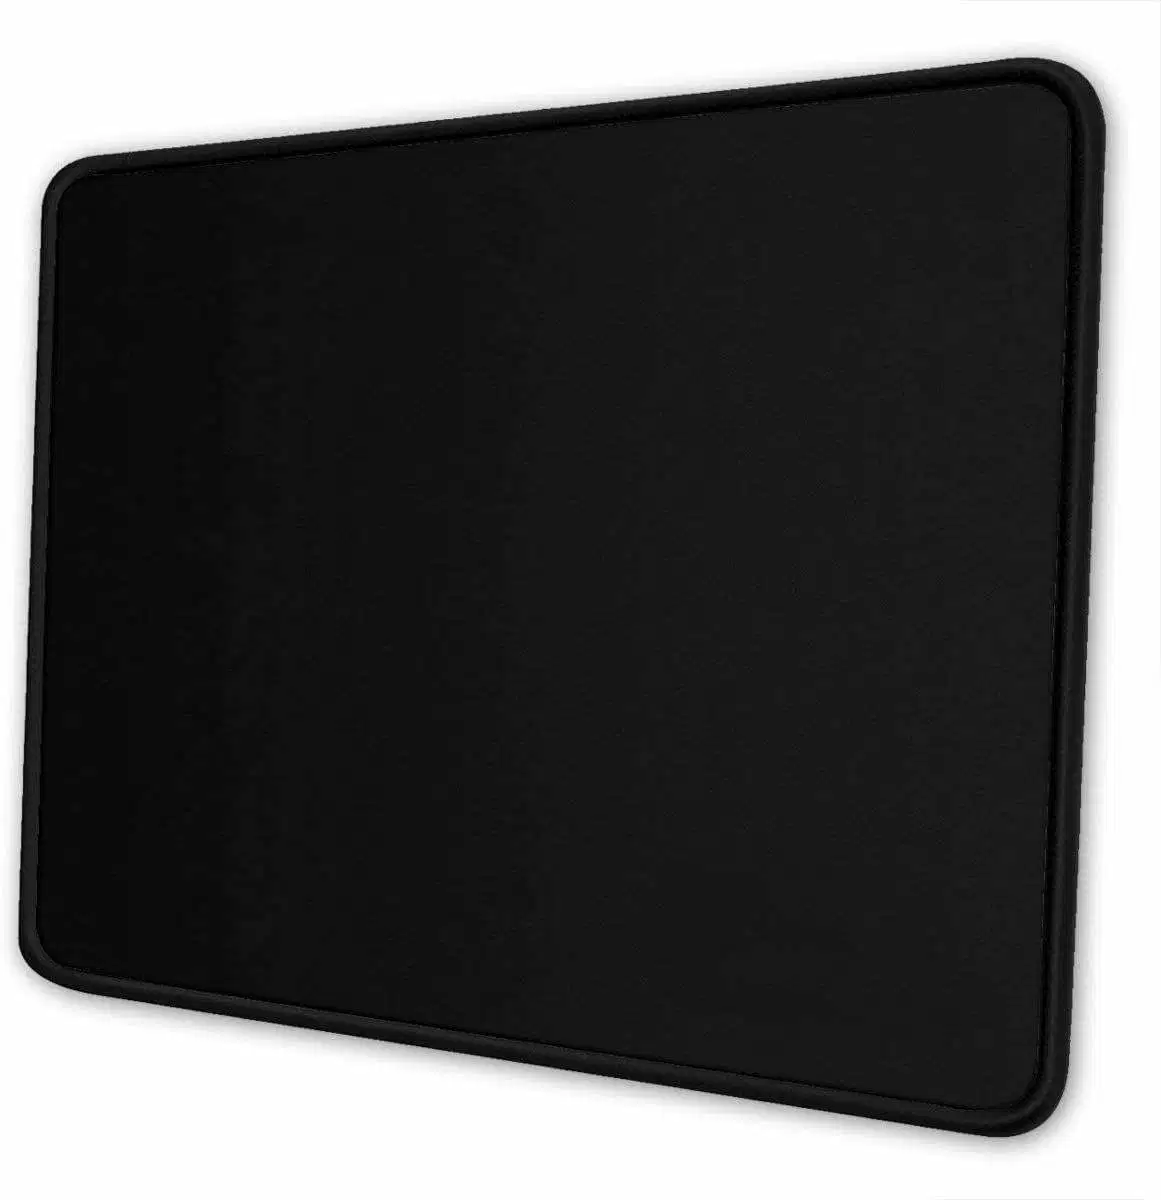 Non-Slip Rubber Base Stitched Edges Small Black Gaming Mouse Pad for Home Office